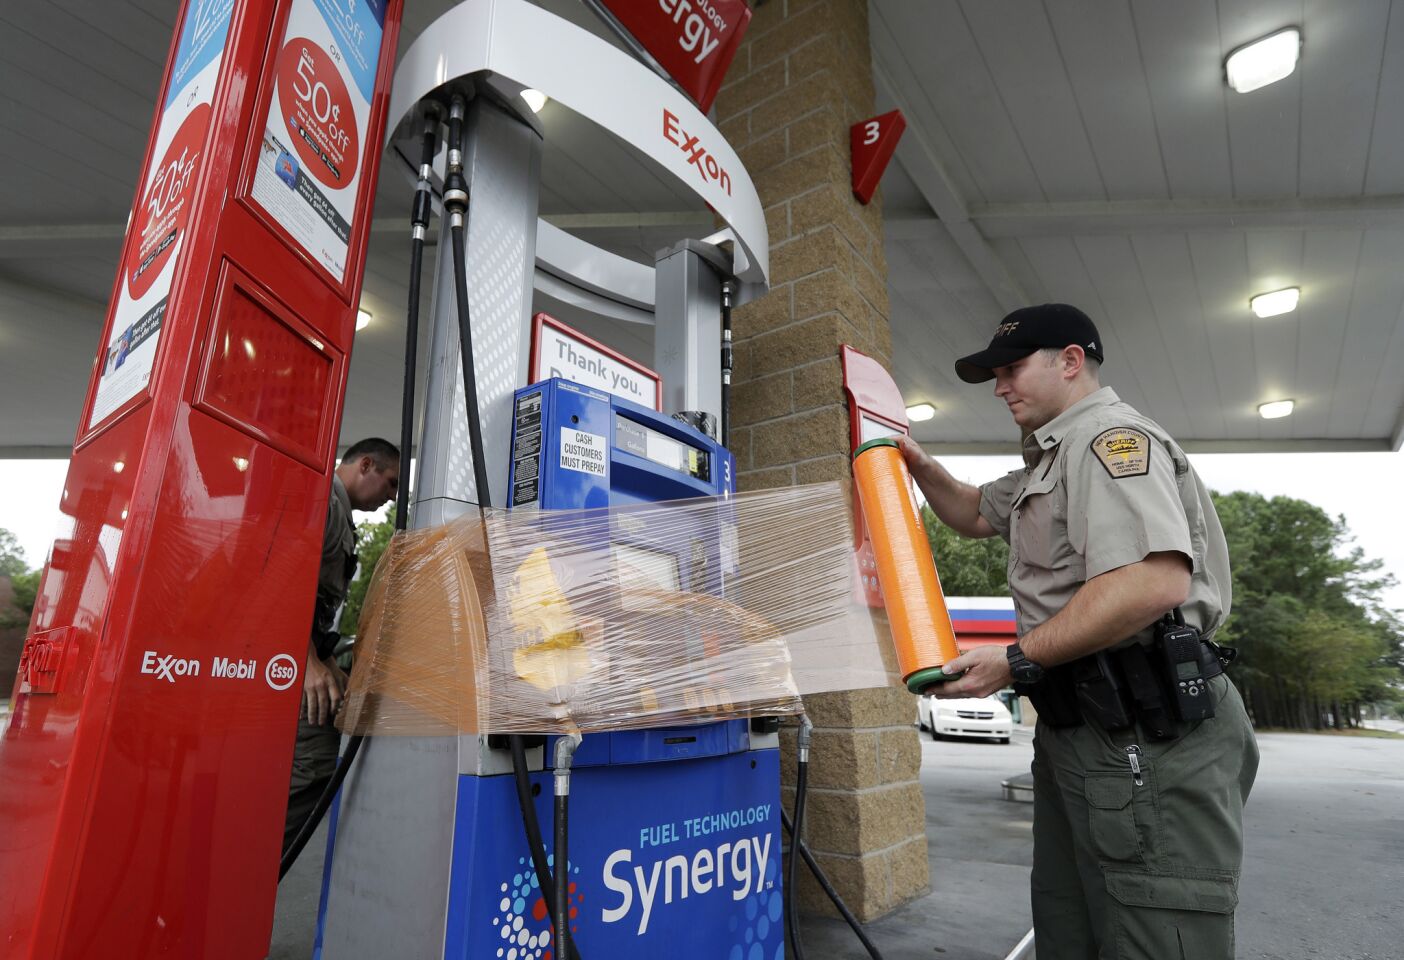 New Hanover Sheriff's Corp. N. Brothers wraps a gas pump for protection in Wilmington, N.C., as Hurricane Florence threatens the coast Thursday, Sept. 13, 2018.